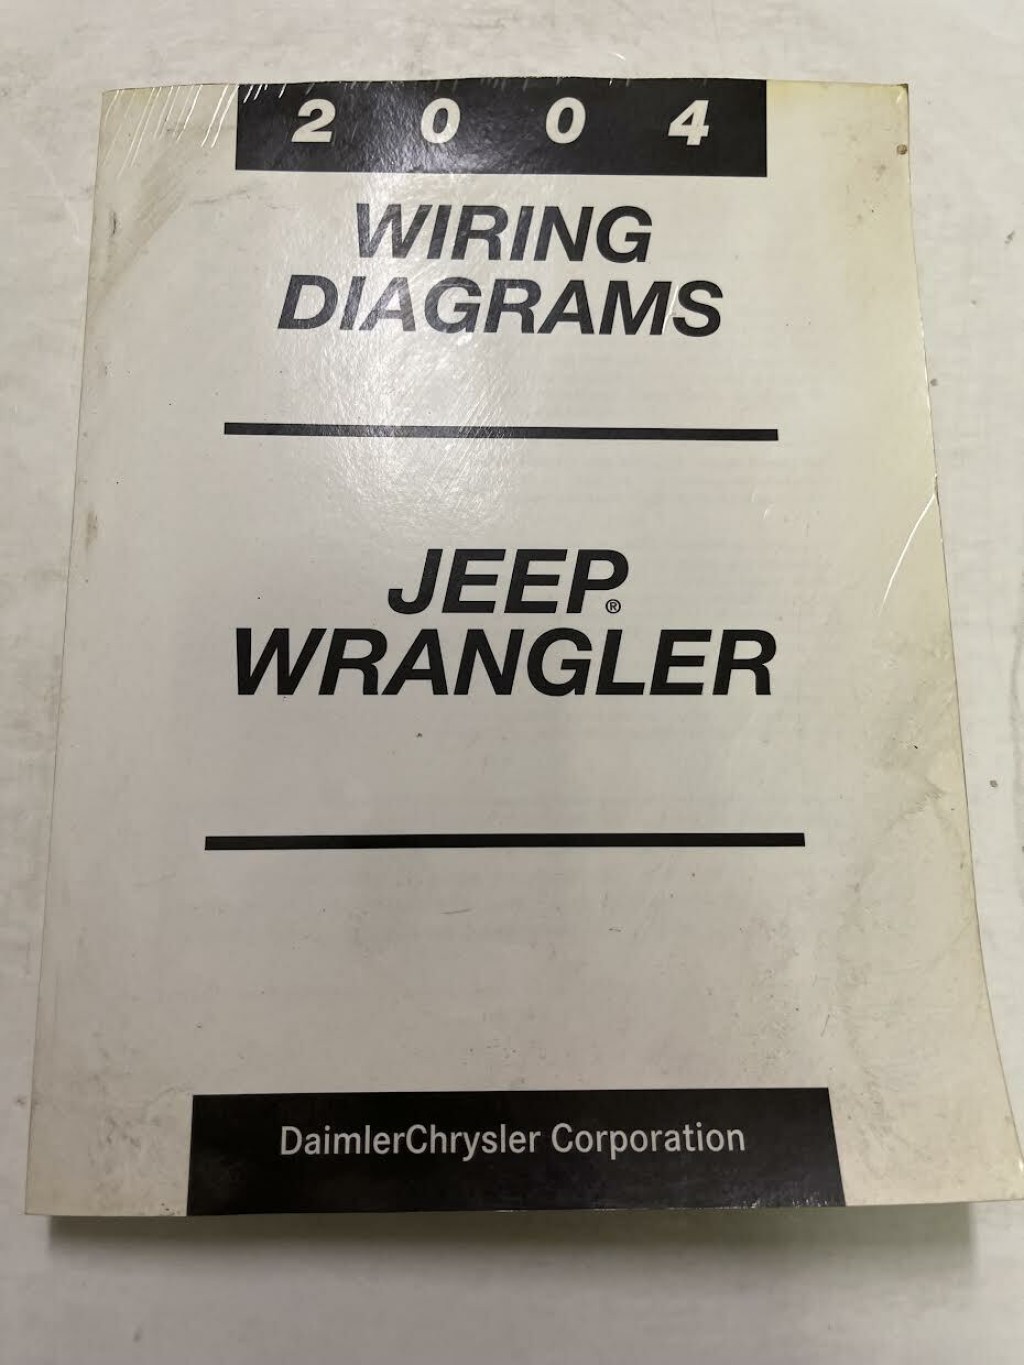 Picture of: Jeep Wrangler Electrical Wiring Diagrams Manual ETM EWD OEM Factory   eBay